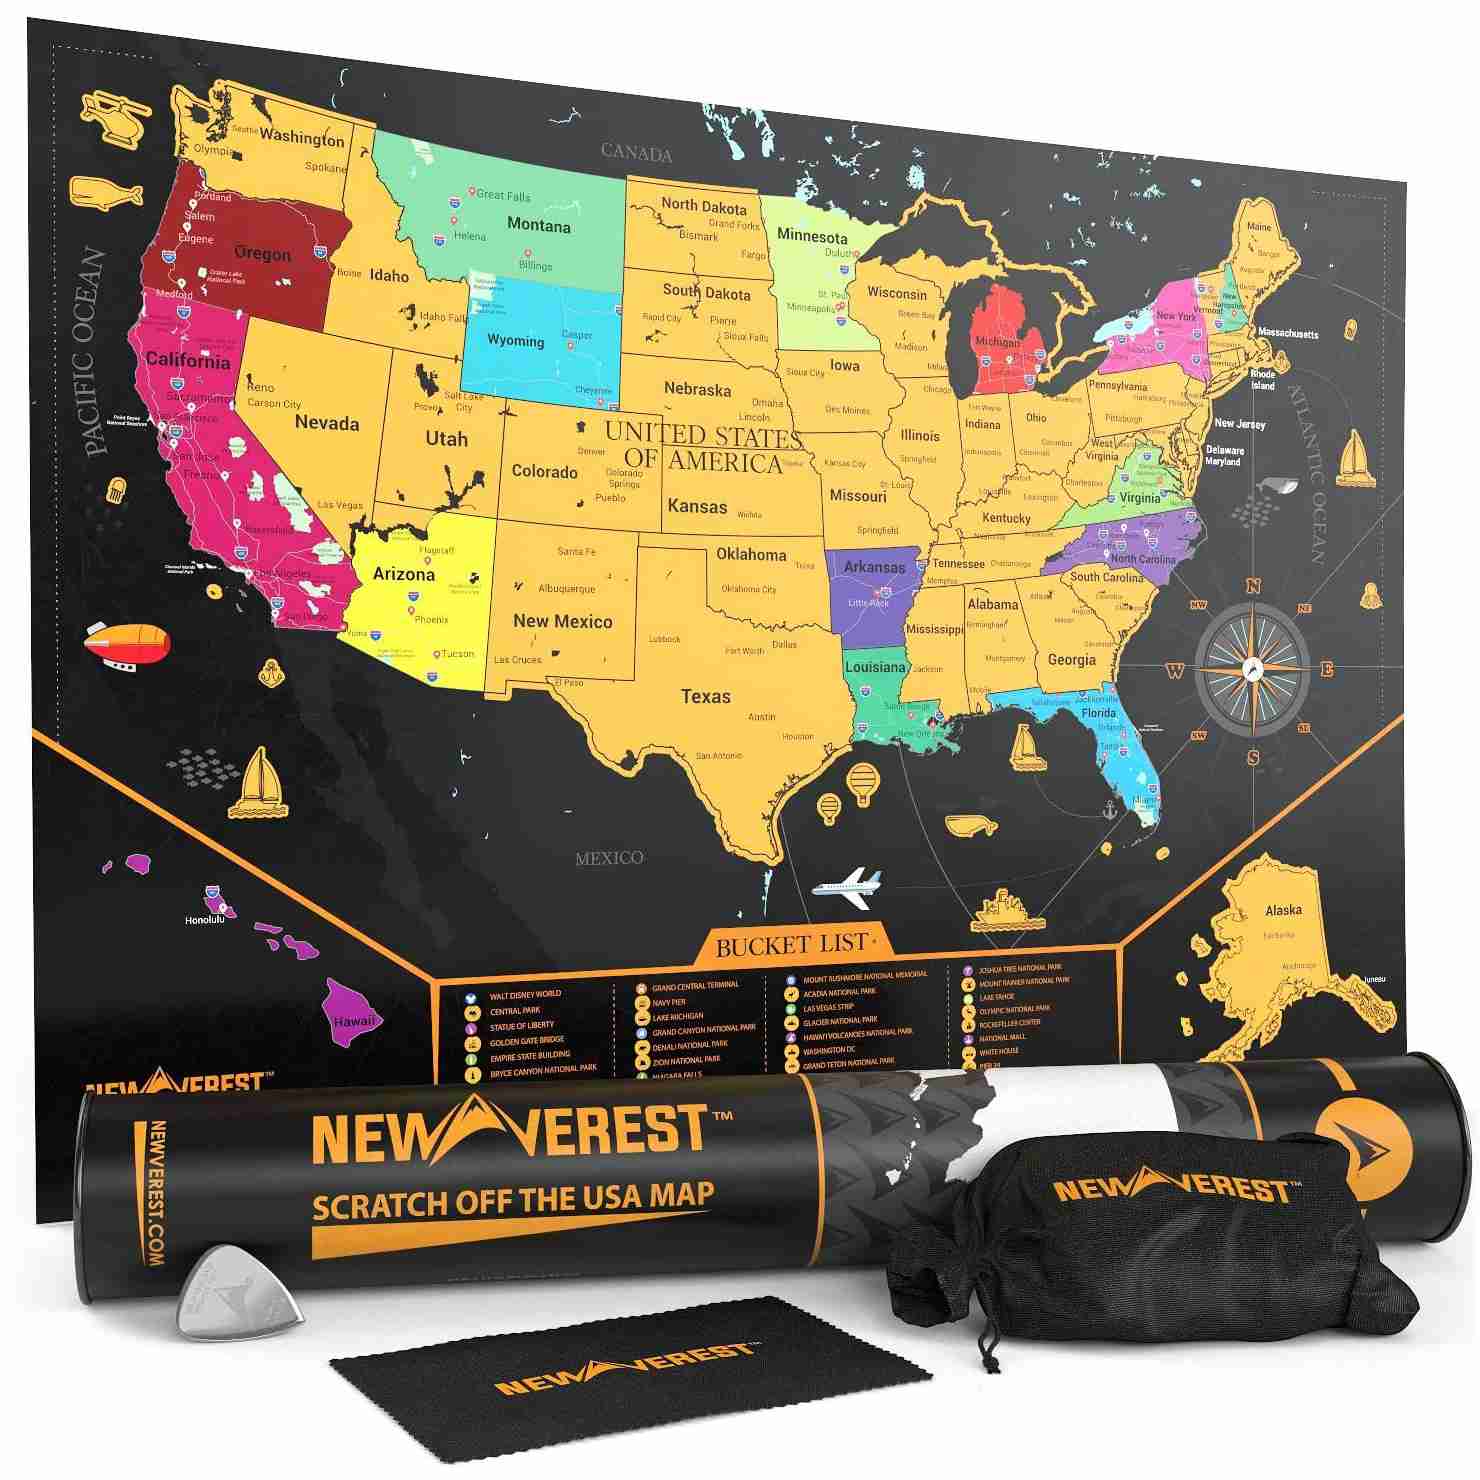 scratch-off-map-of-the-usa-travel-poster with cash back rebate